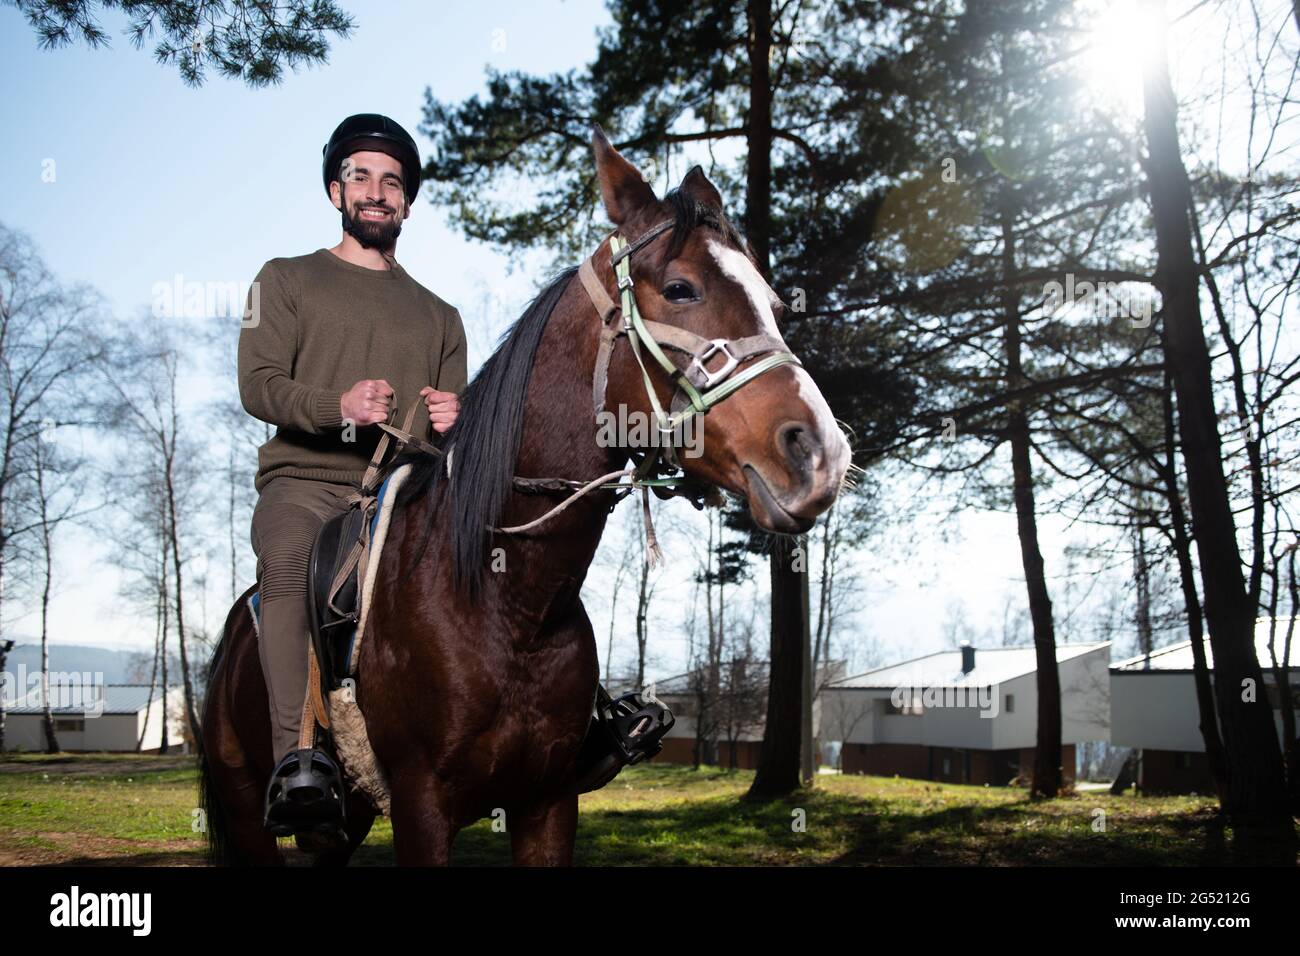 Portrait of Confident Male Jockey With Horse Standing on Field Stock Photo